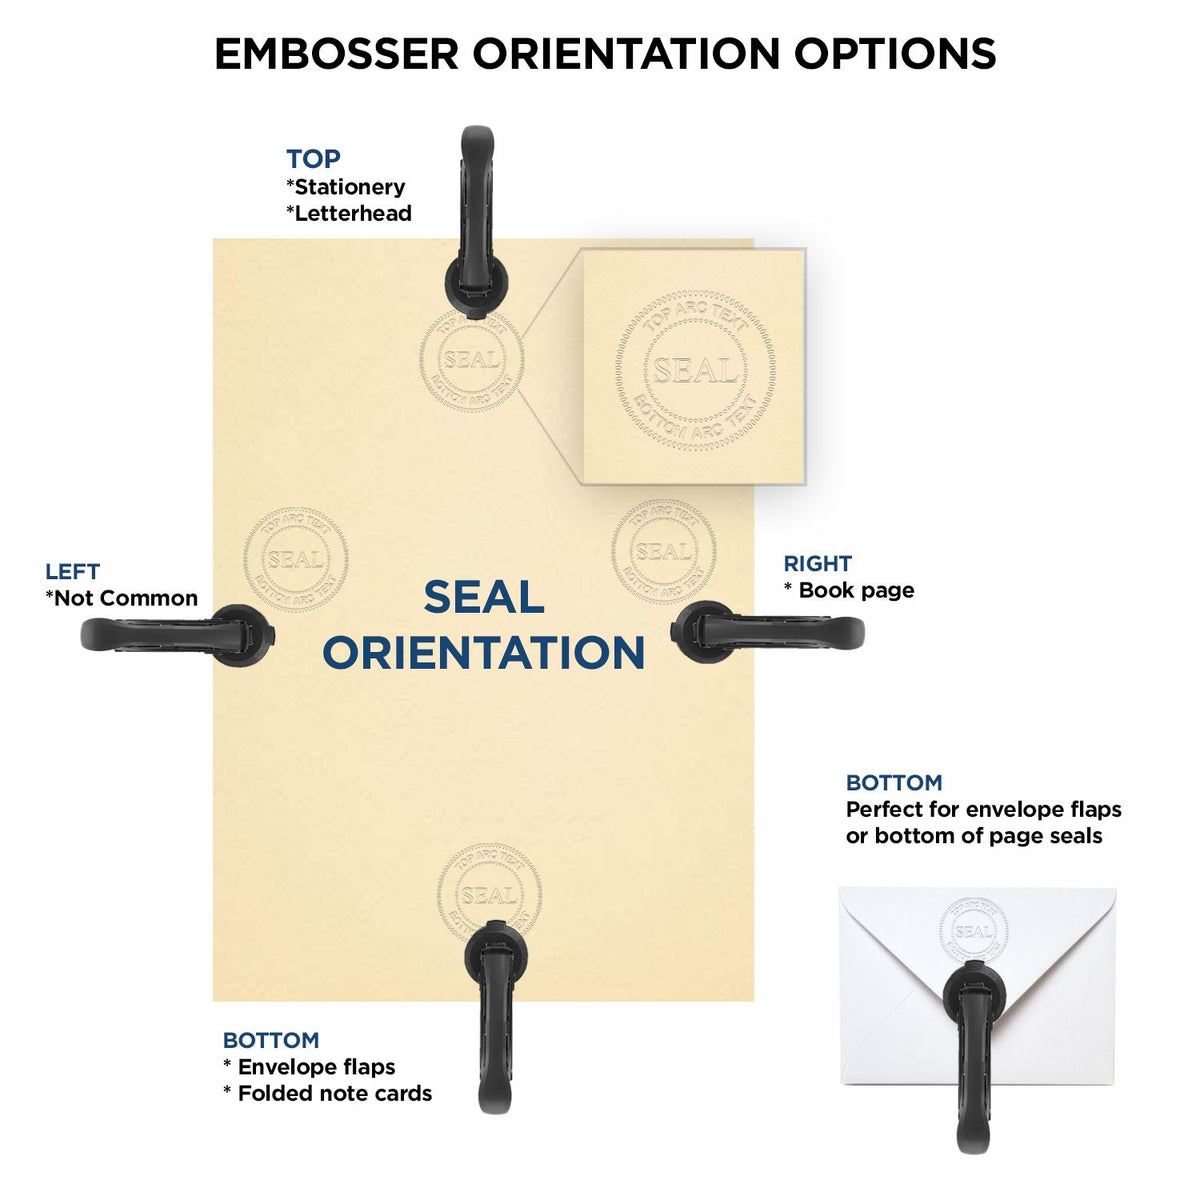 An infographic for the Heavy Duty Cast Iron Kentucky Architect Embosser showing embosser orientation, this is showing examples of a top, bottom, right and left insert.